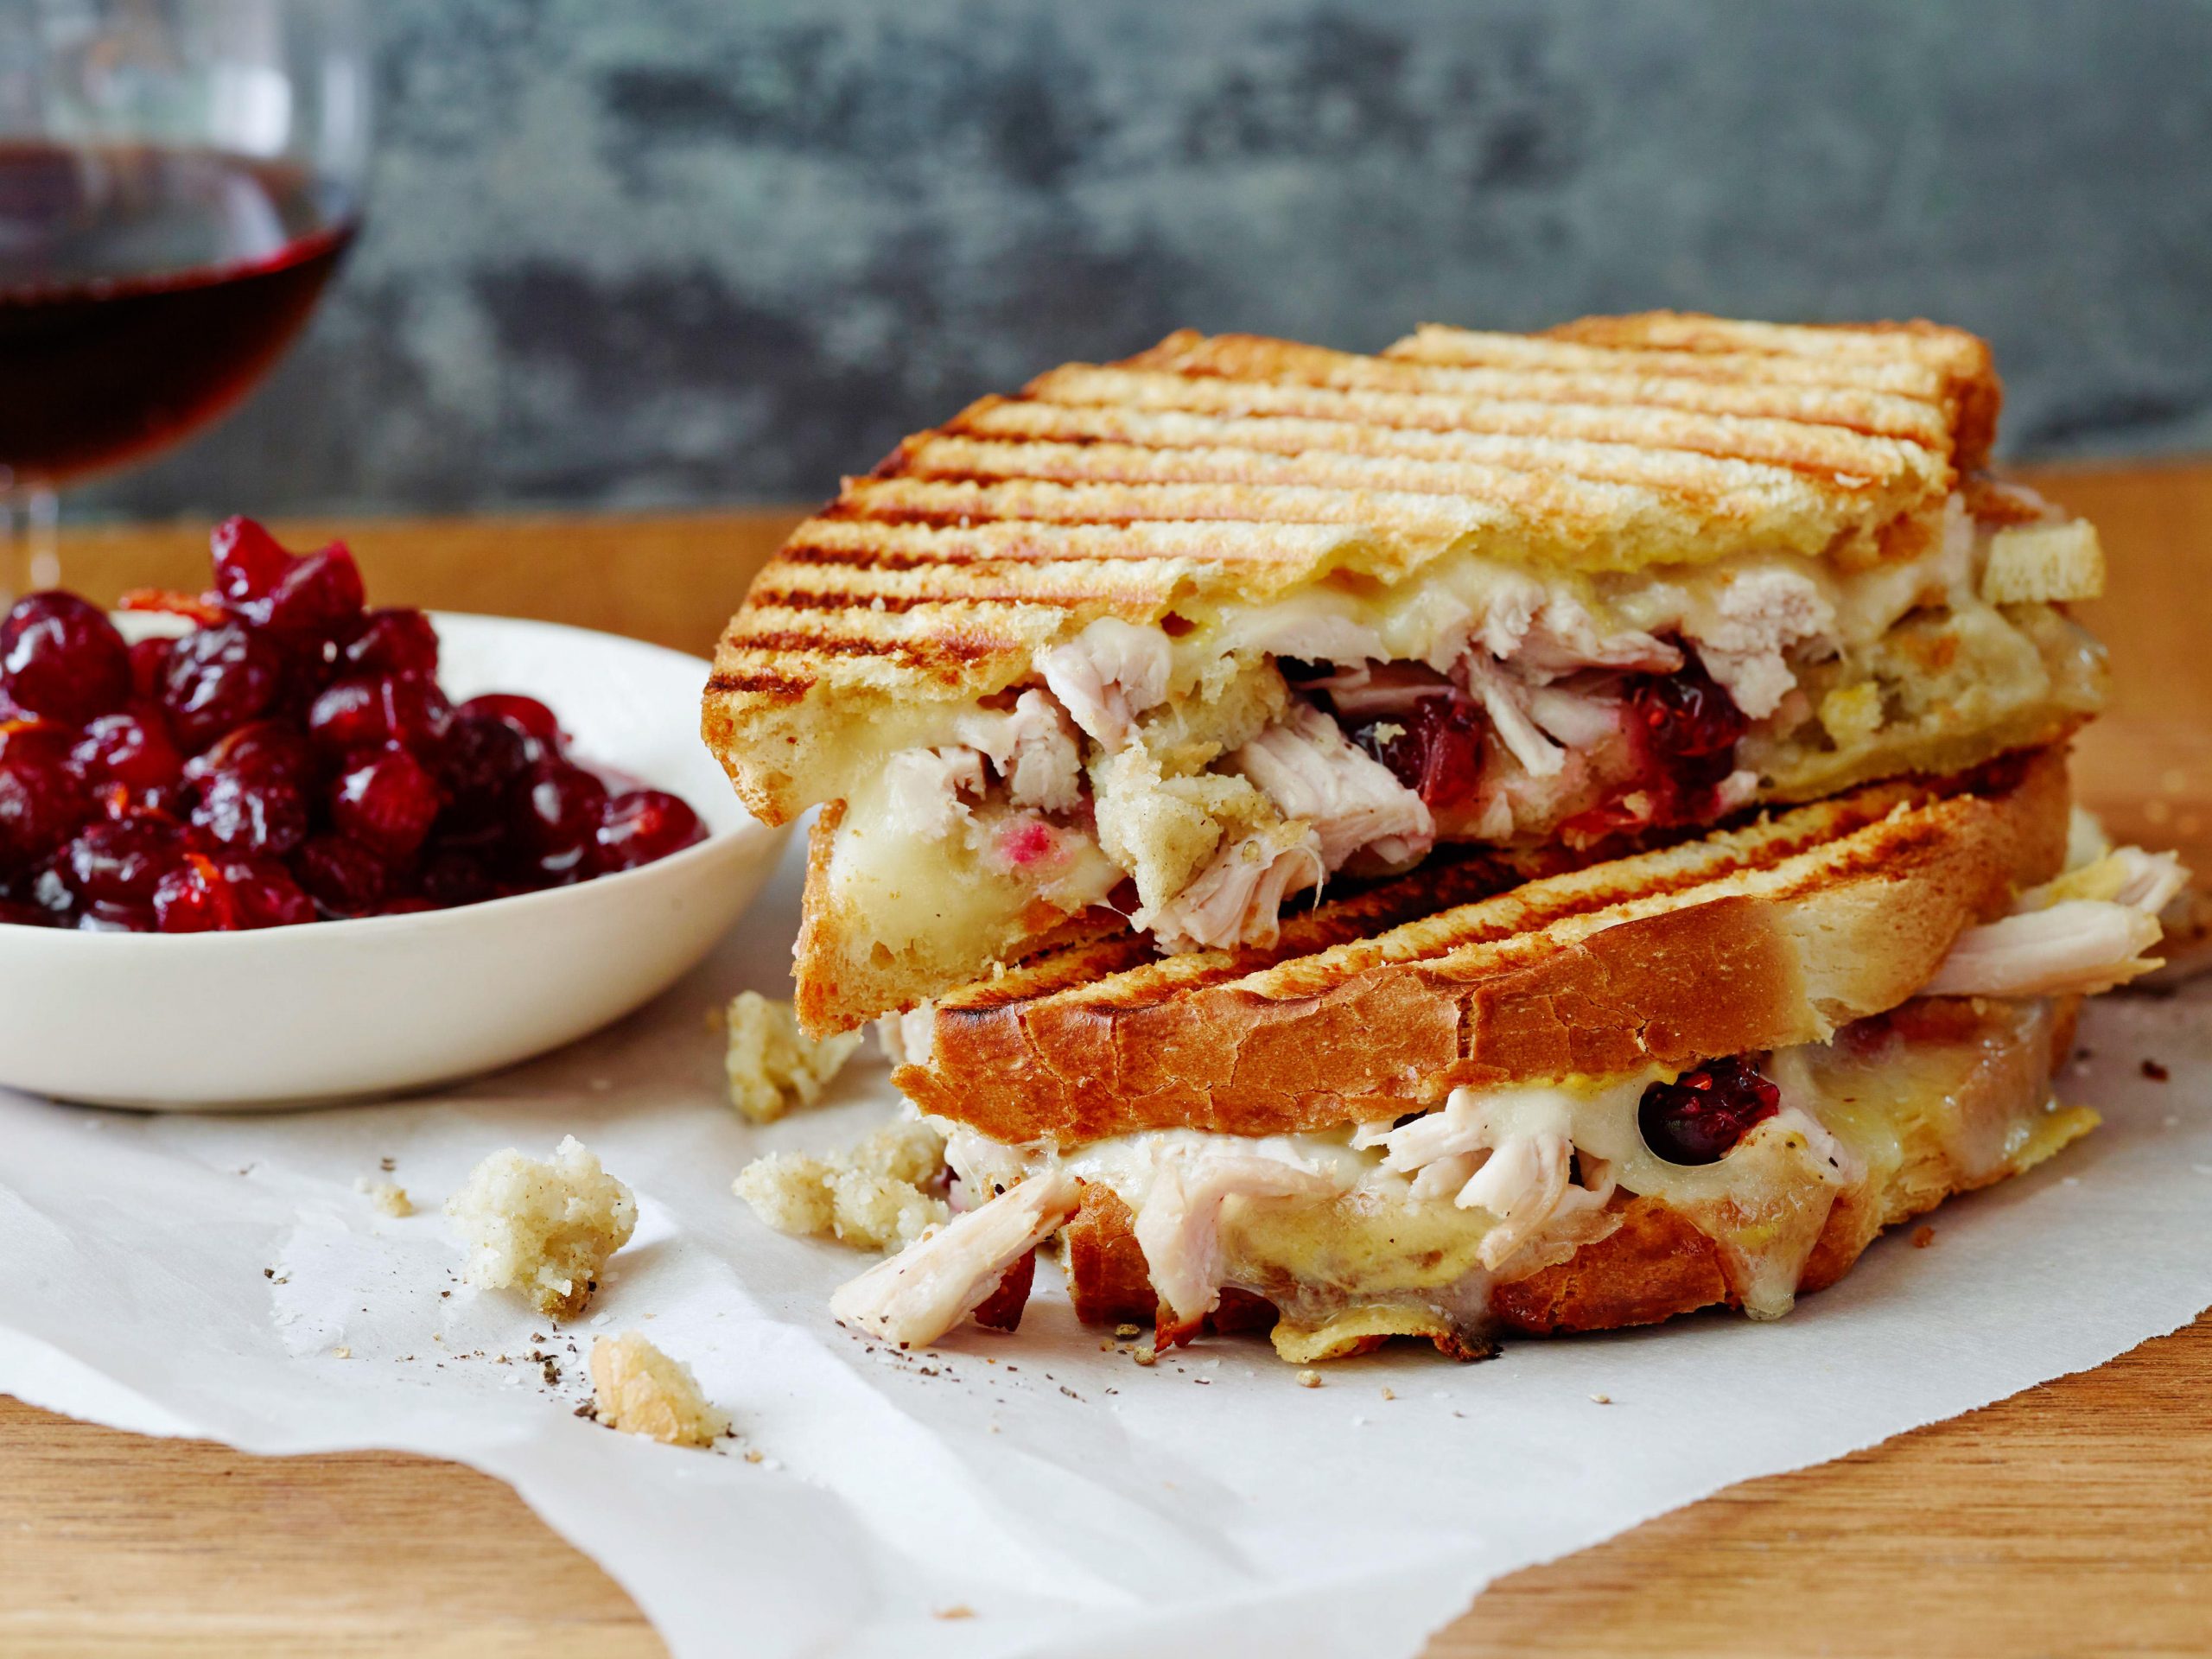 HHIREB’s Tasty Tuesday: Leftover Thanksgiving Panini